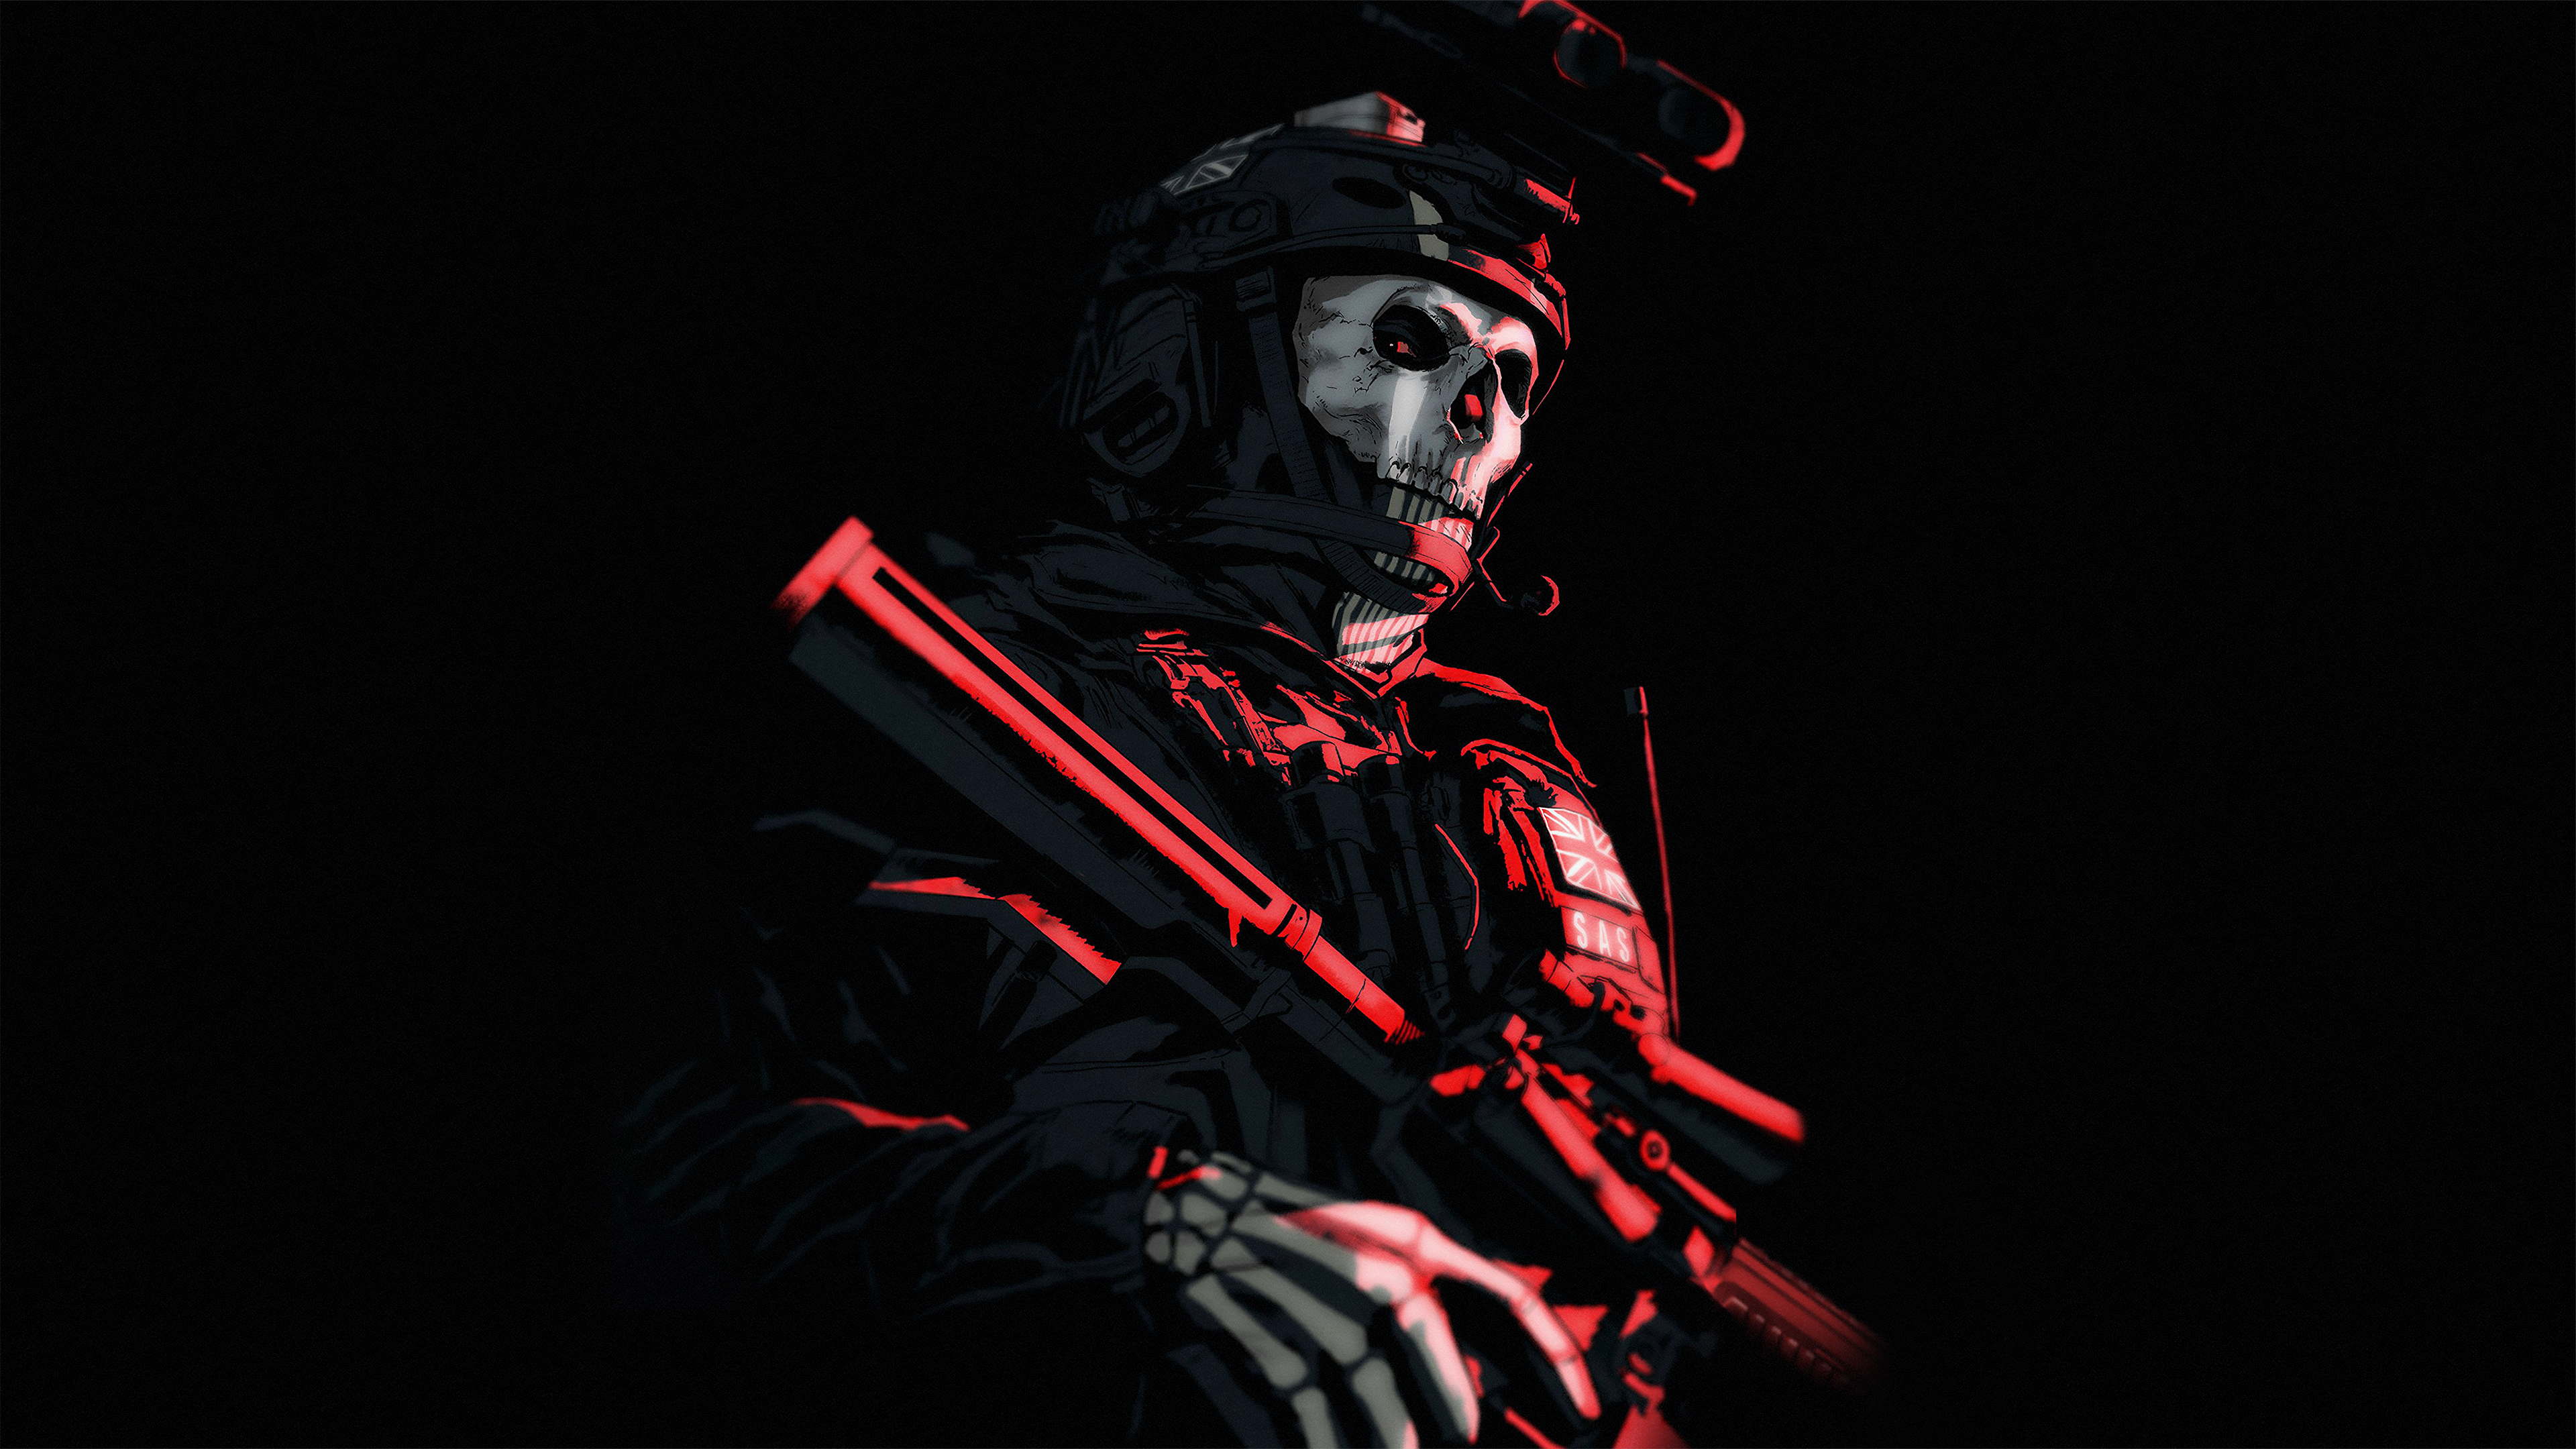 General 3840x2160 Call of Duty Call of Duty: Modern Warfare 2 illustration digital art 4K artwork ghost video game characters skull soldier mask video games black background Call of Duty: Ghosts simple background minimalism gun helmet Simon "Ghost" Riley